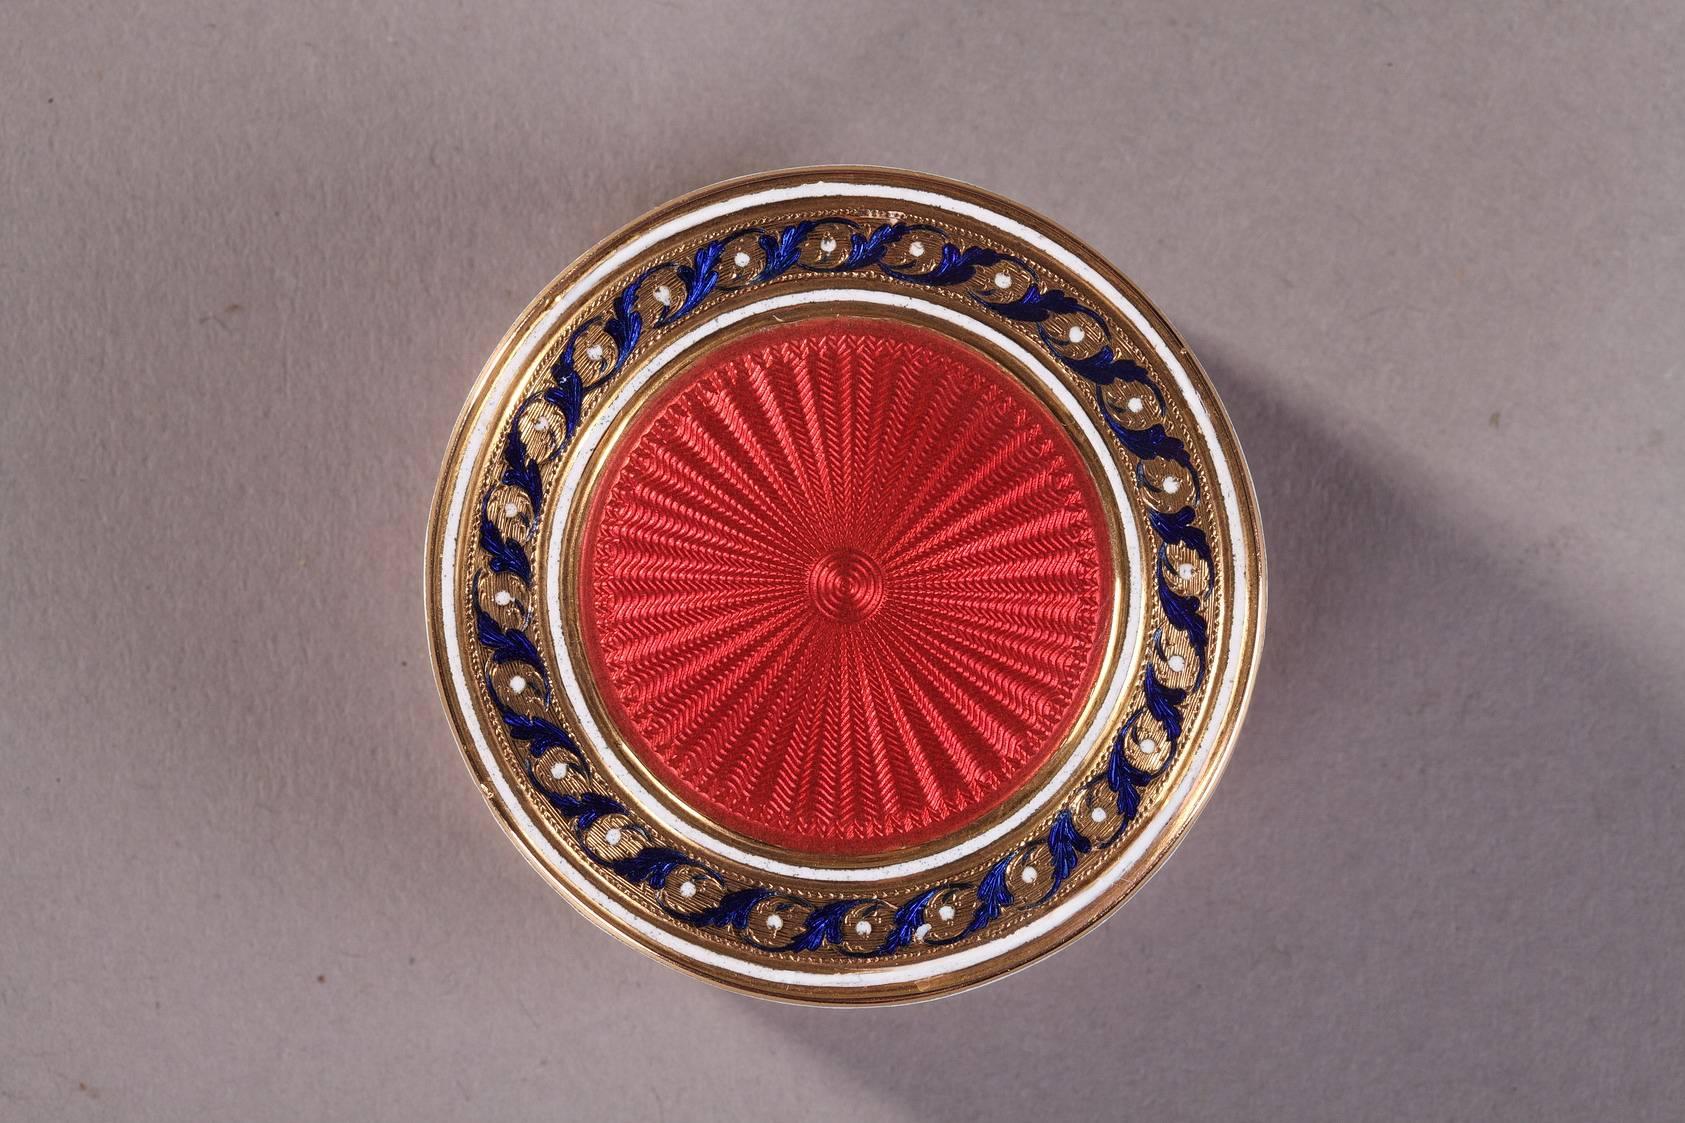 Circular box in pink enameled gold. The removable lid is embellished with an intricate starburst pattern, and the body and bottom of the box are decorated with a wave pattern. The translucent enamel leaves the intricate patterns in the gold